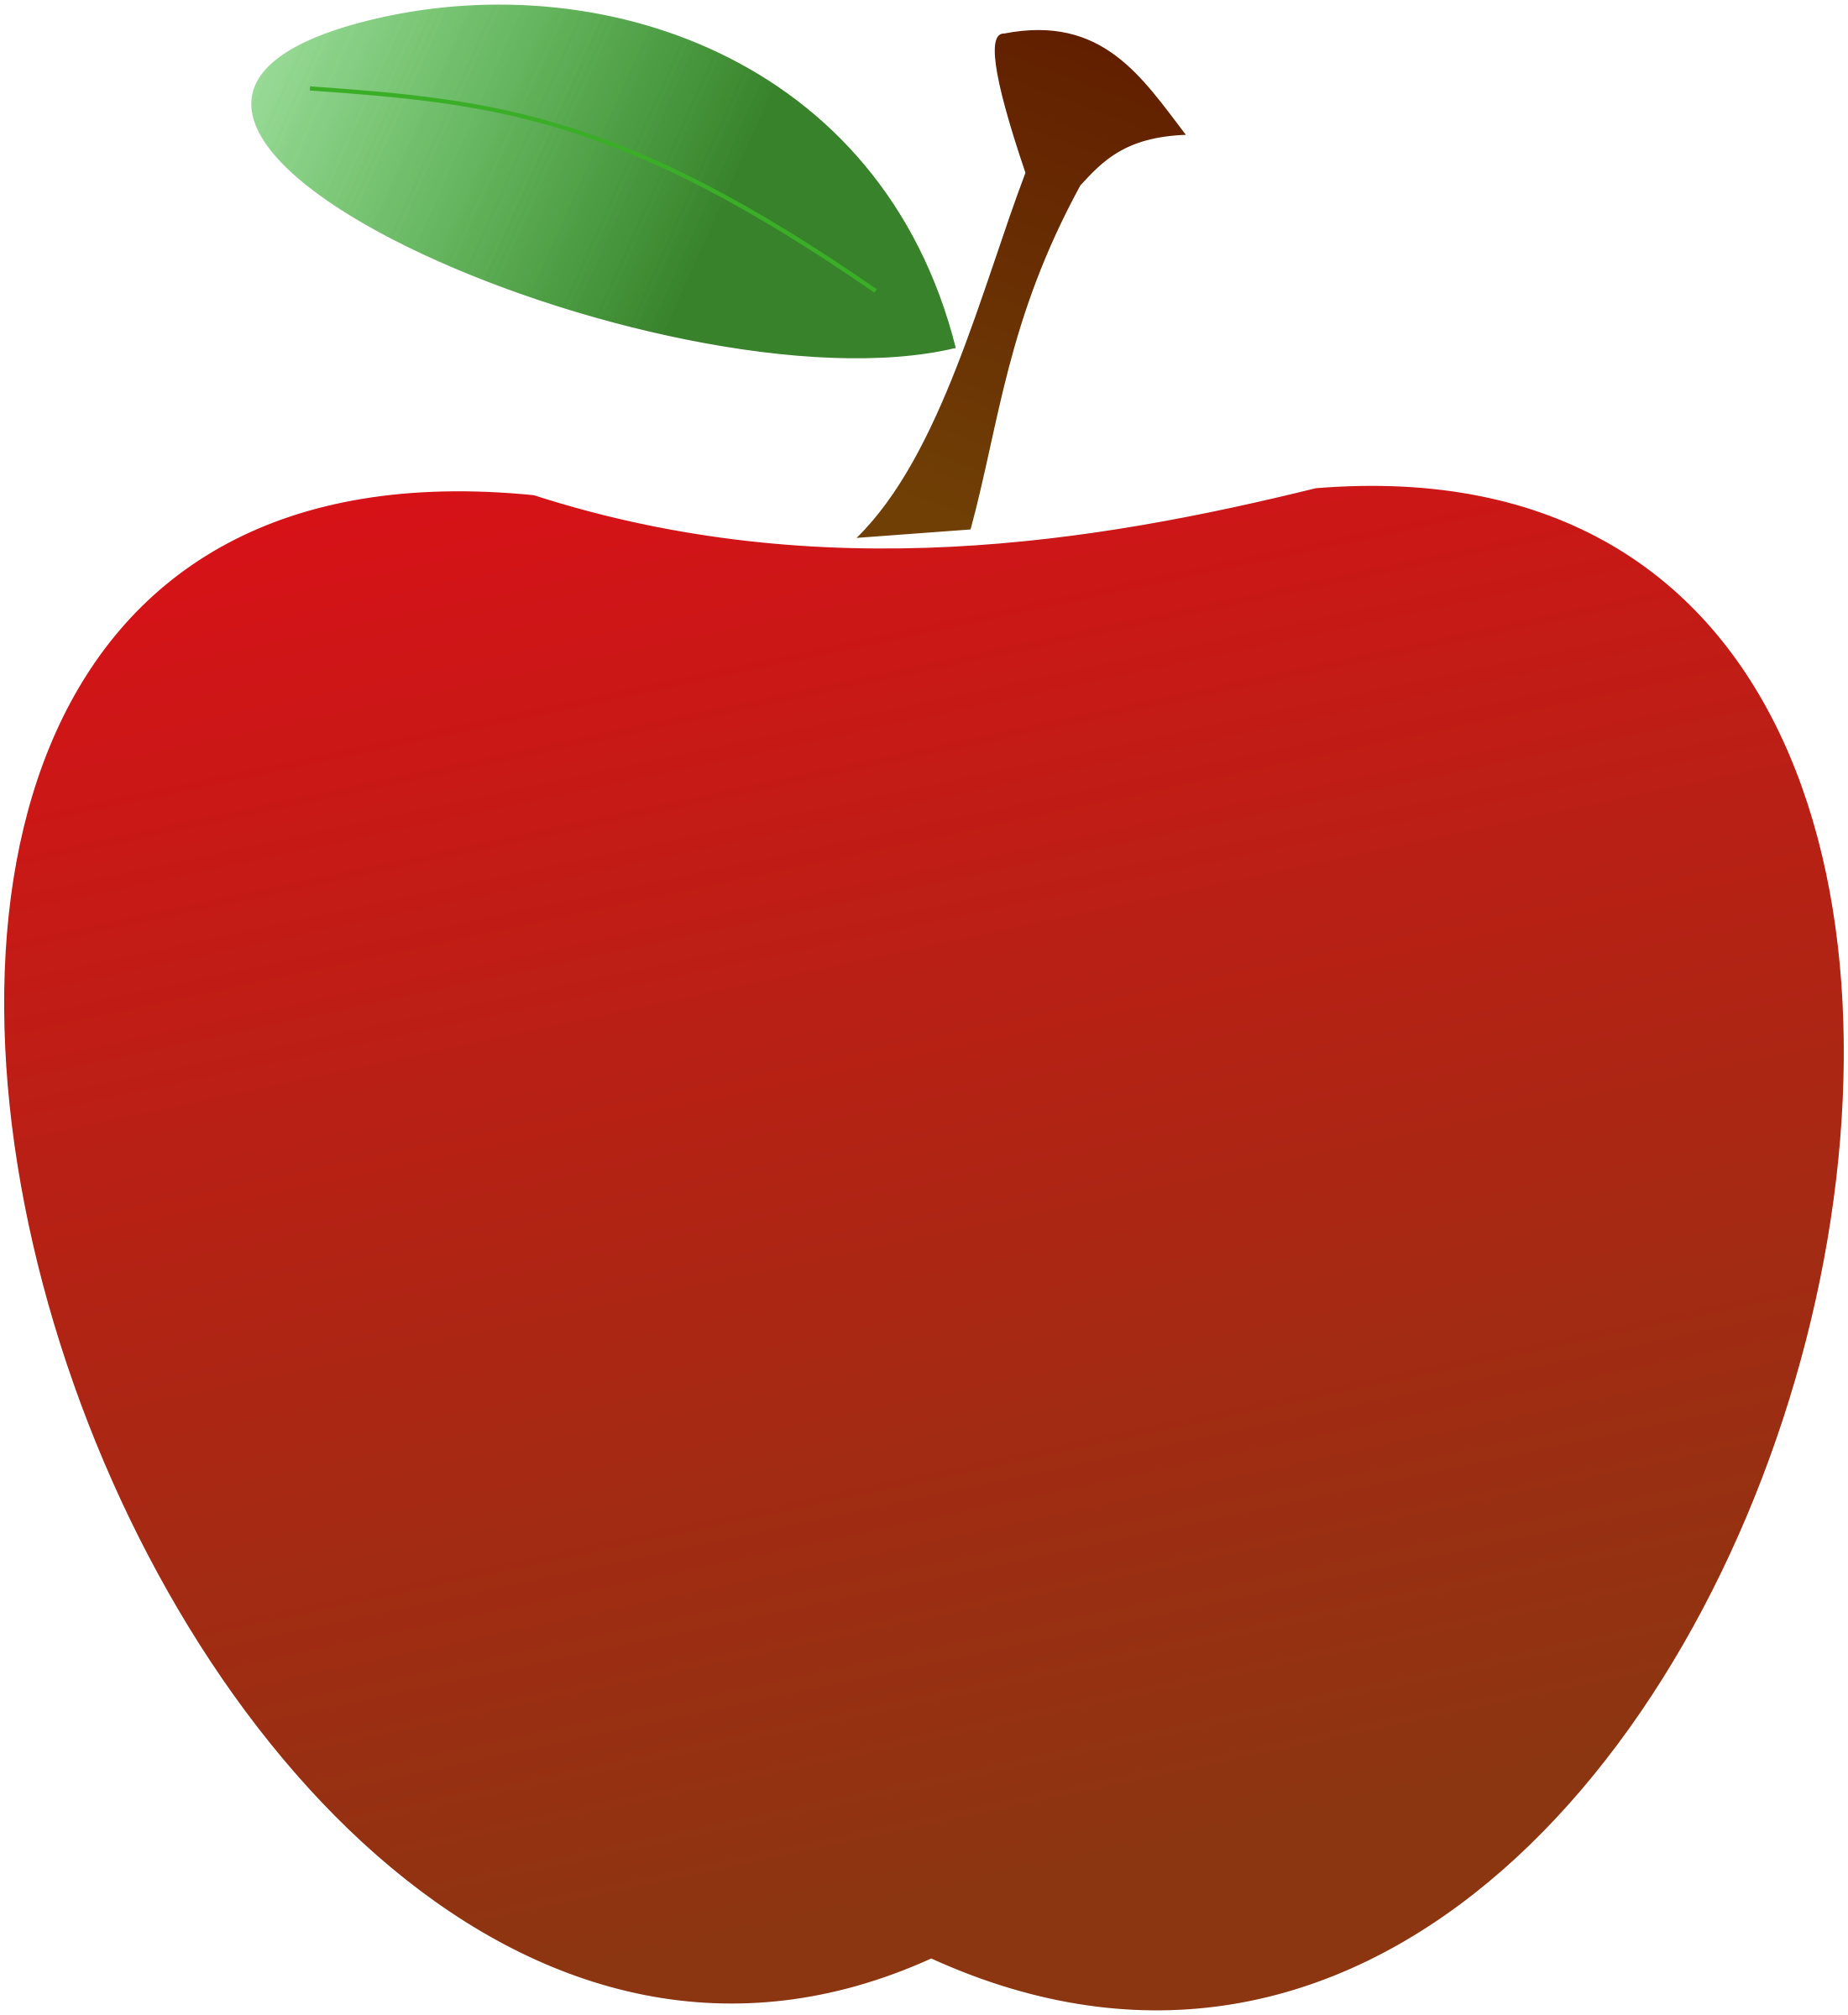 Free Apple Clipart and printa